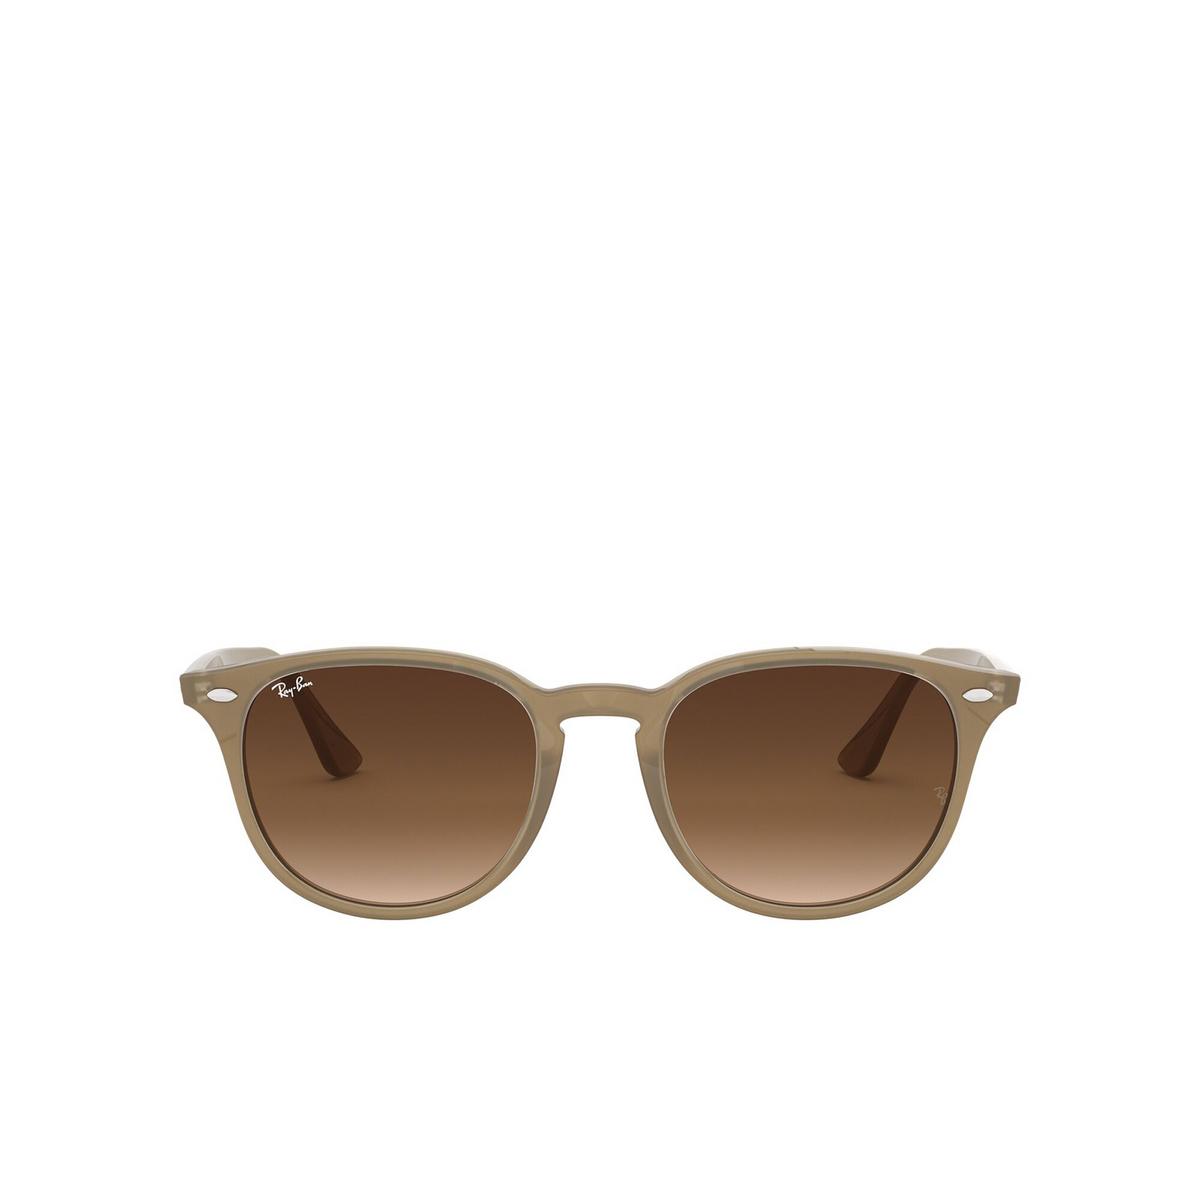 Ray-Ban® Round Sunglasses: RB4259 color Opal Beige 616613 - front view.